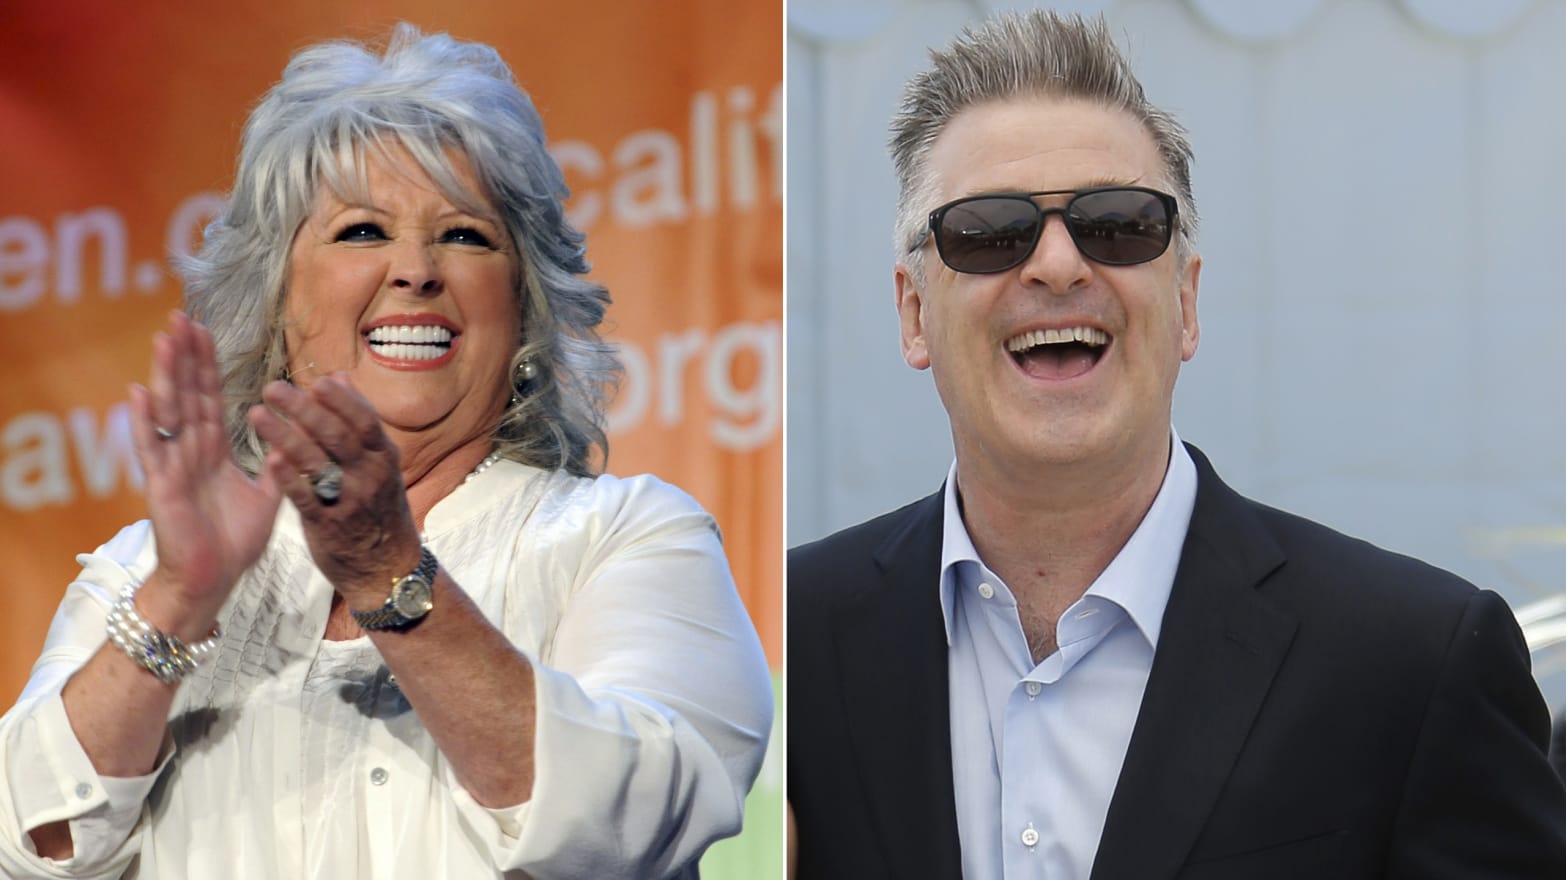 Here's Why The Food Network Canceled Paula's Party